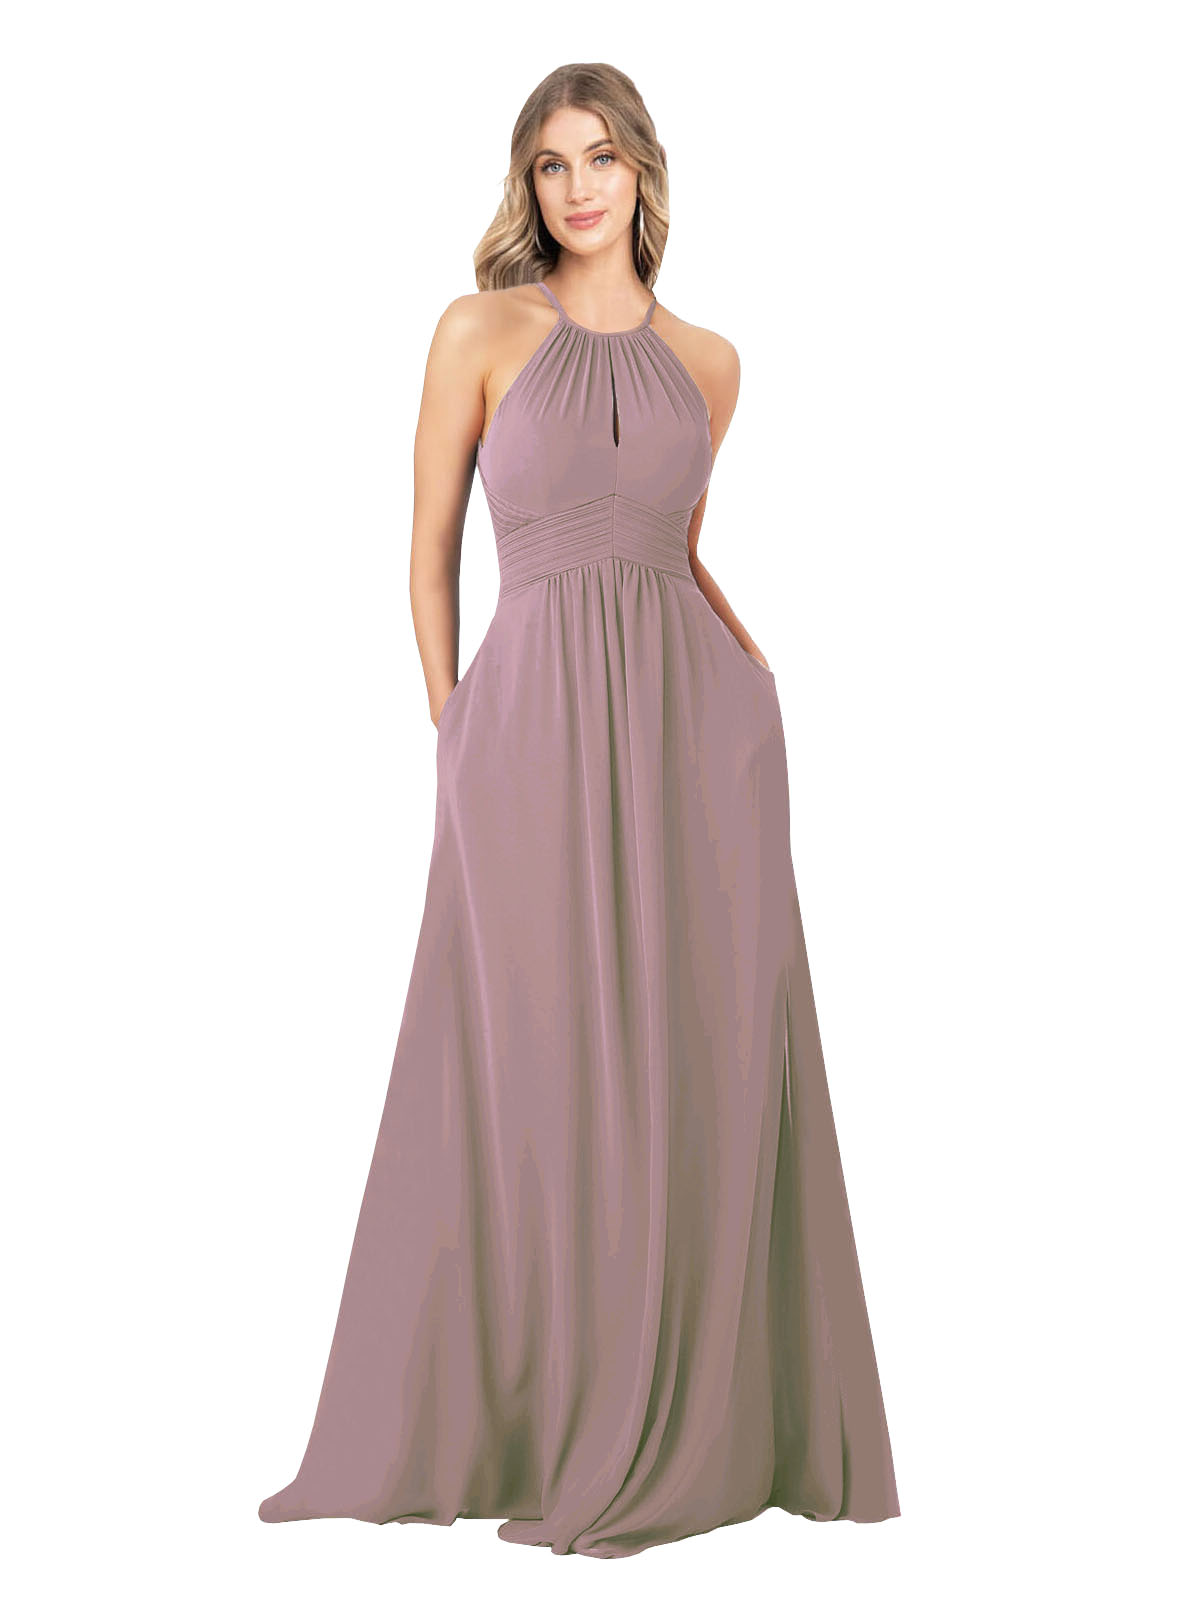 Dusty Rose A-Line High Neck Sleeveless Long Bridesmaid Dress Cassiopeia